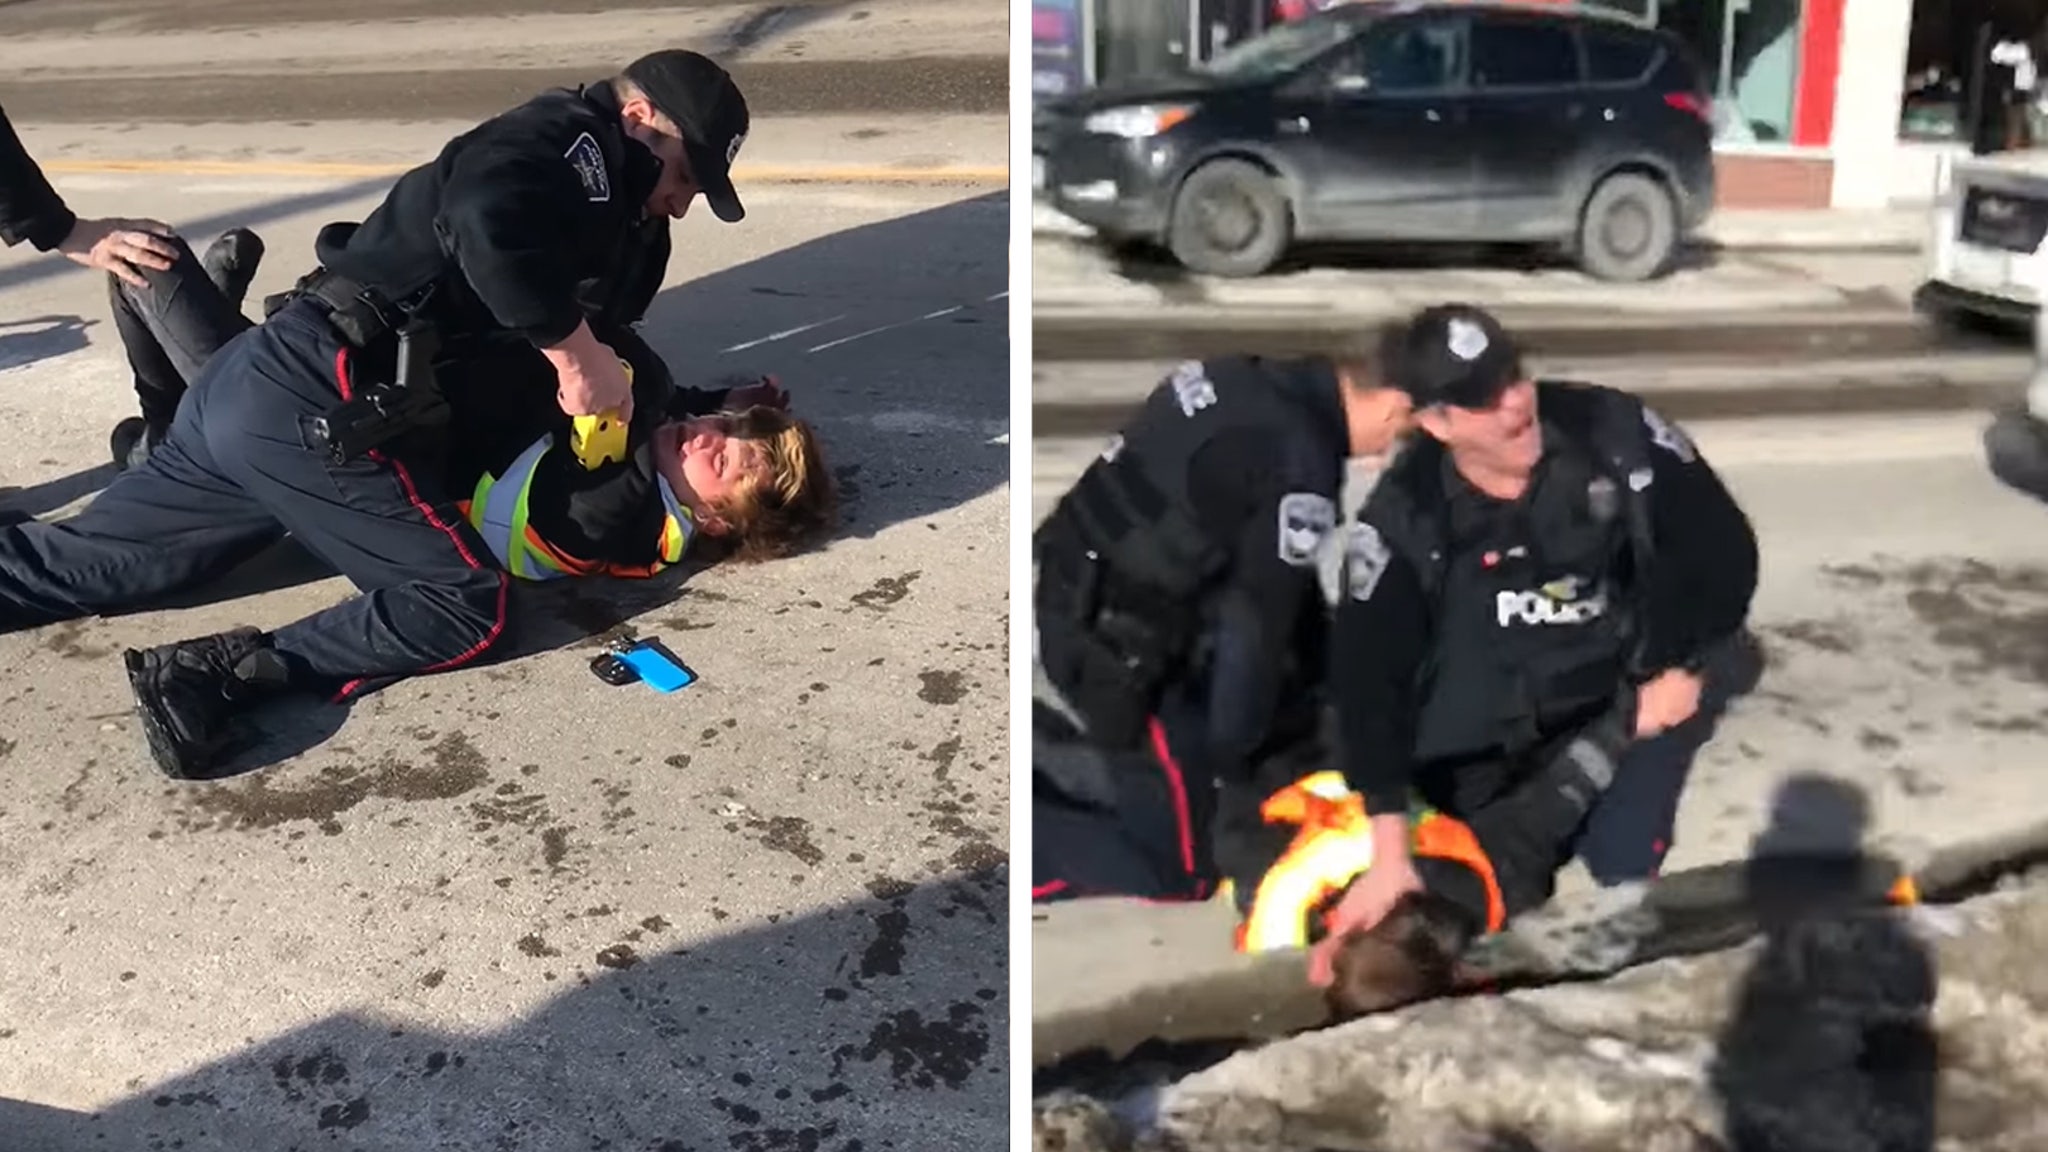 Police officers crush the skater’s head on the ground after he allegedly crashes into a light vehicle